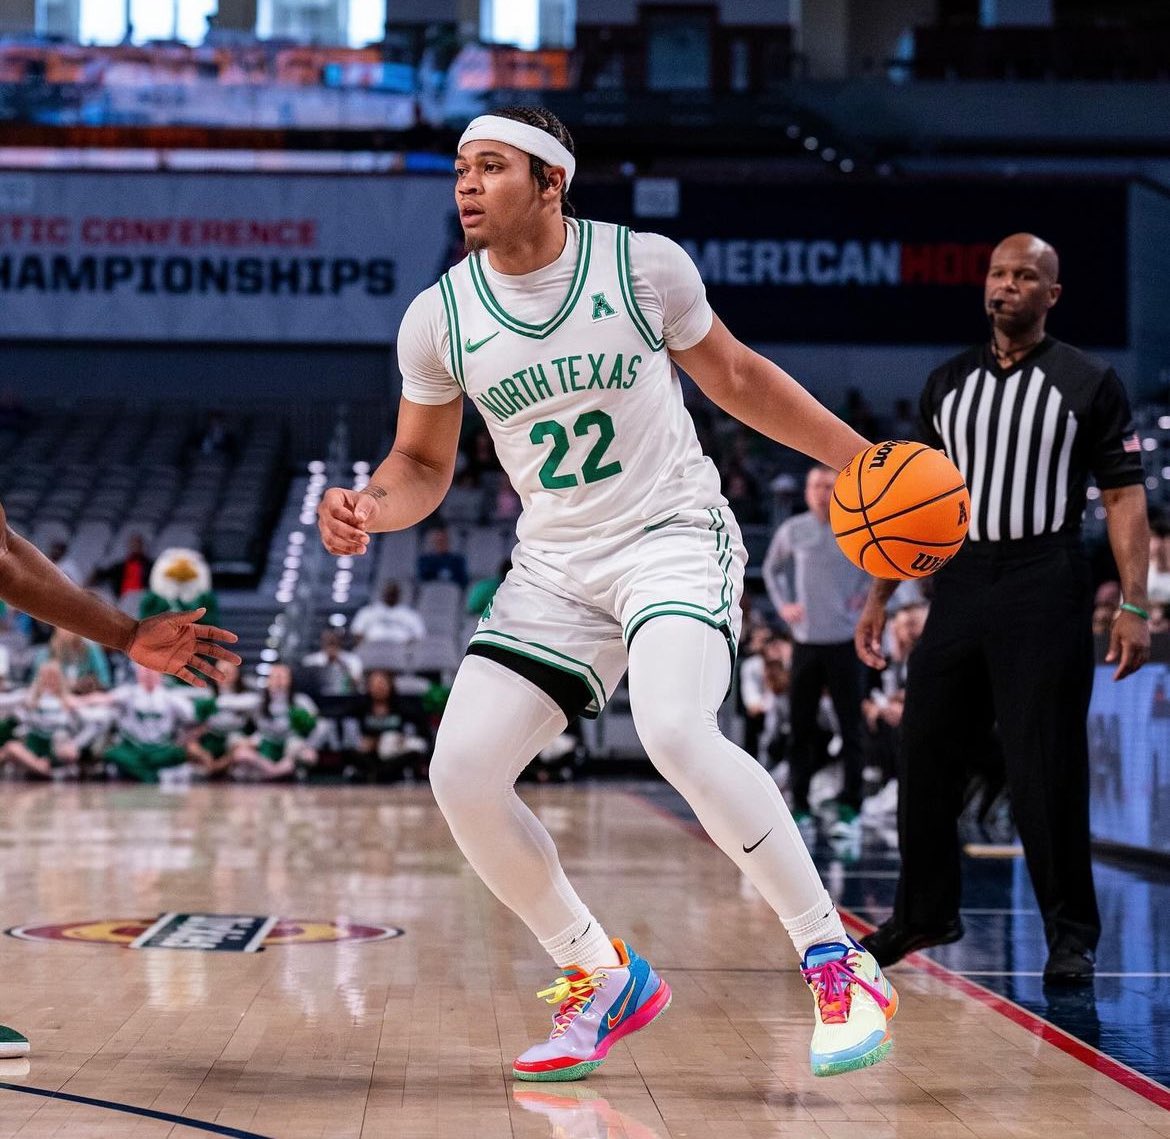 NEWS: North Texas guard CJ Noland is entering the transfer portal source told @TheAthleticCBB He averaged 10.9 points and 2.8 rebounds per game while shooting 38.4% from three.